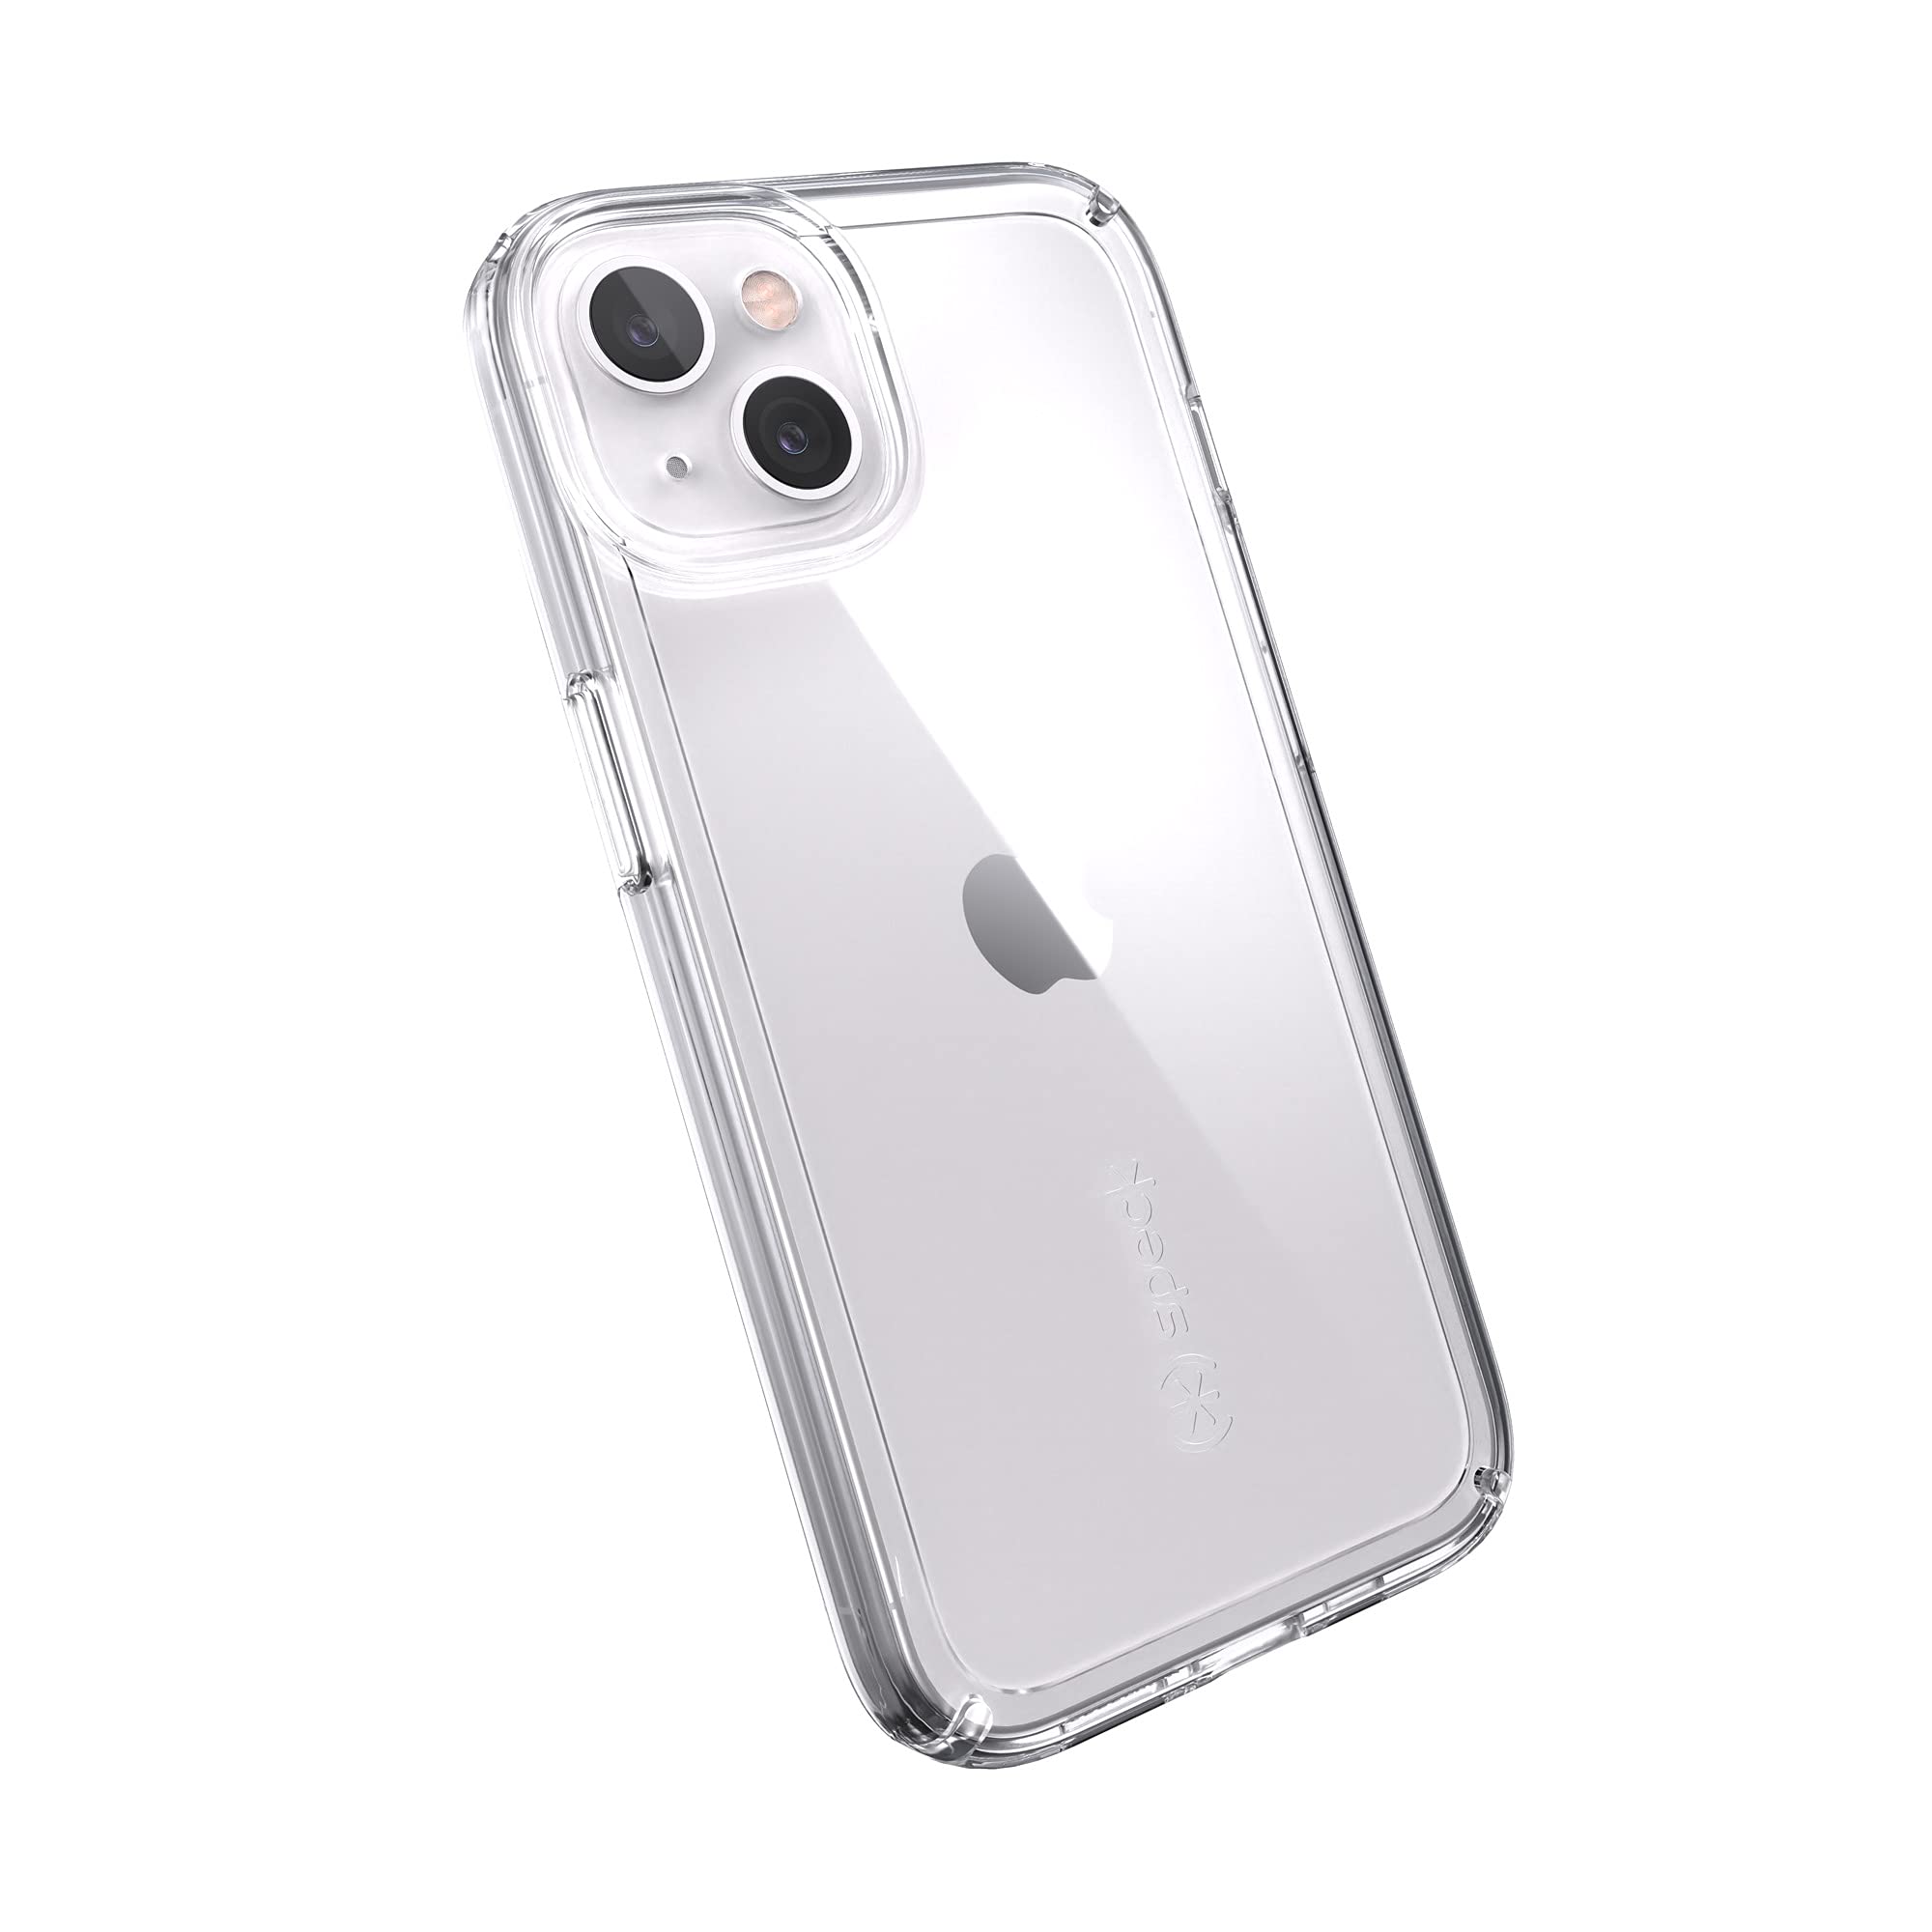 Speck iPhone 13 Clear Case - Drop Protection, Scratch Resistant iPhone 13 Case with Anti-Yellowing & Anti-Fade Slim, Dual Layer Design for 6.1 Inch Phones - Wireless Charging Compatible - GemShell